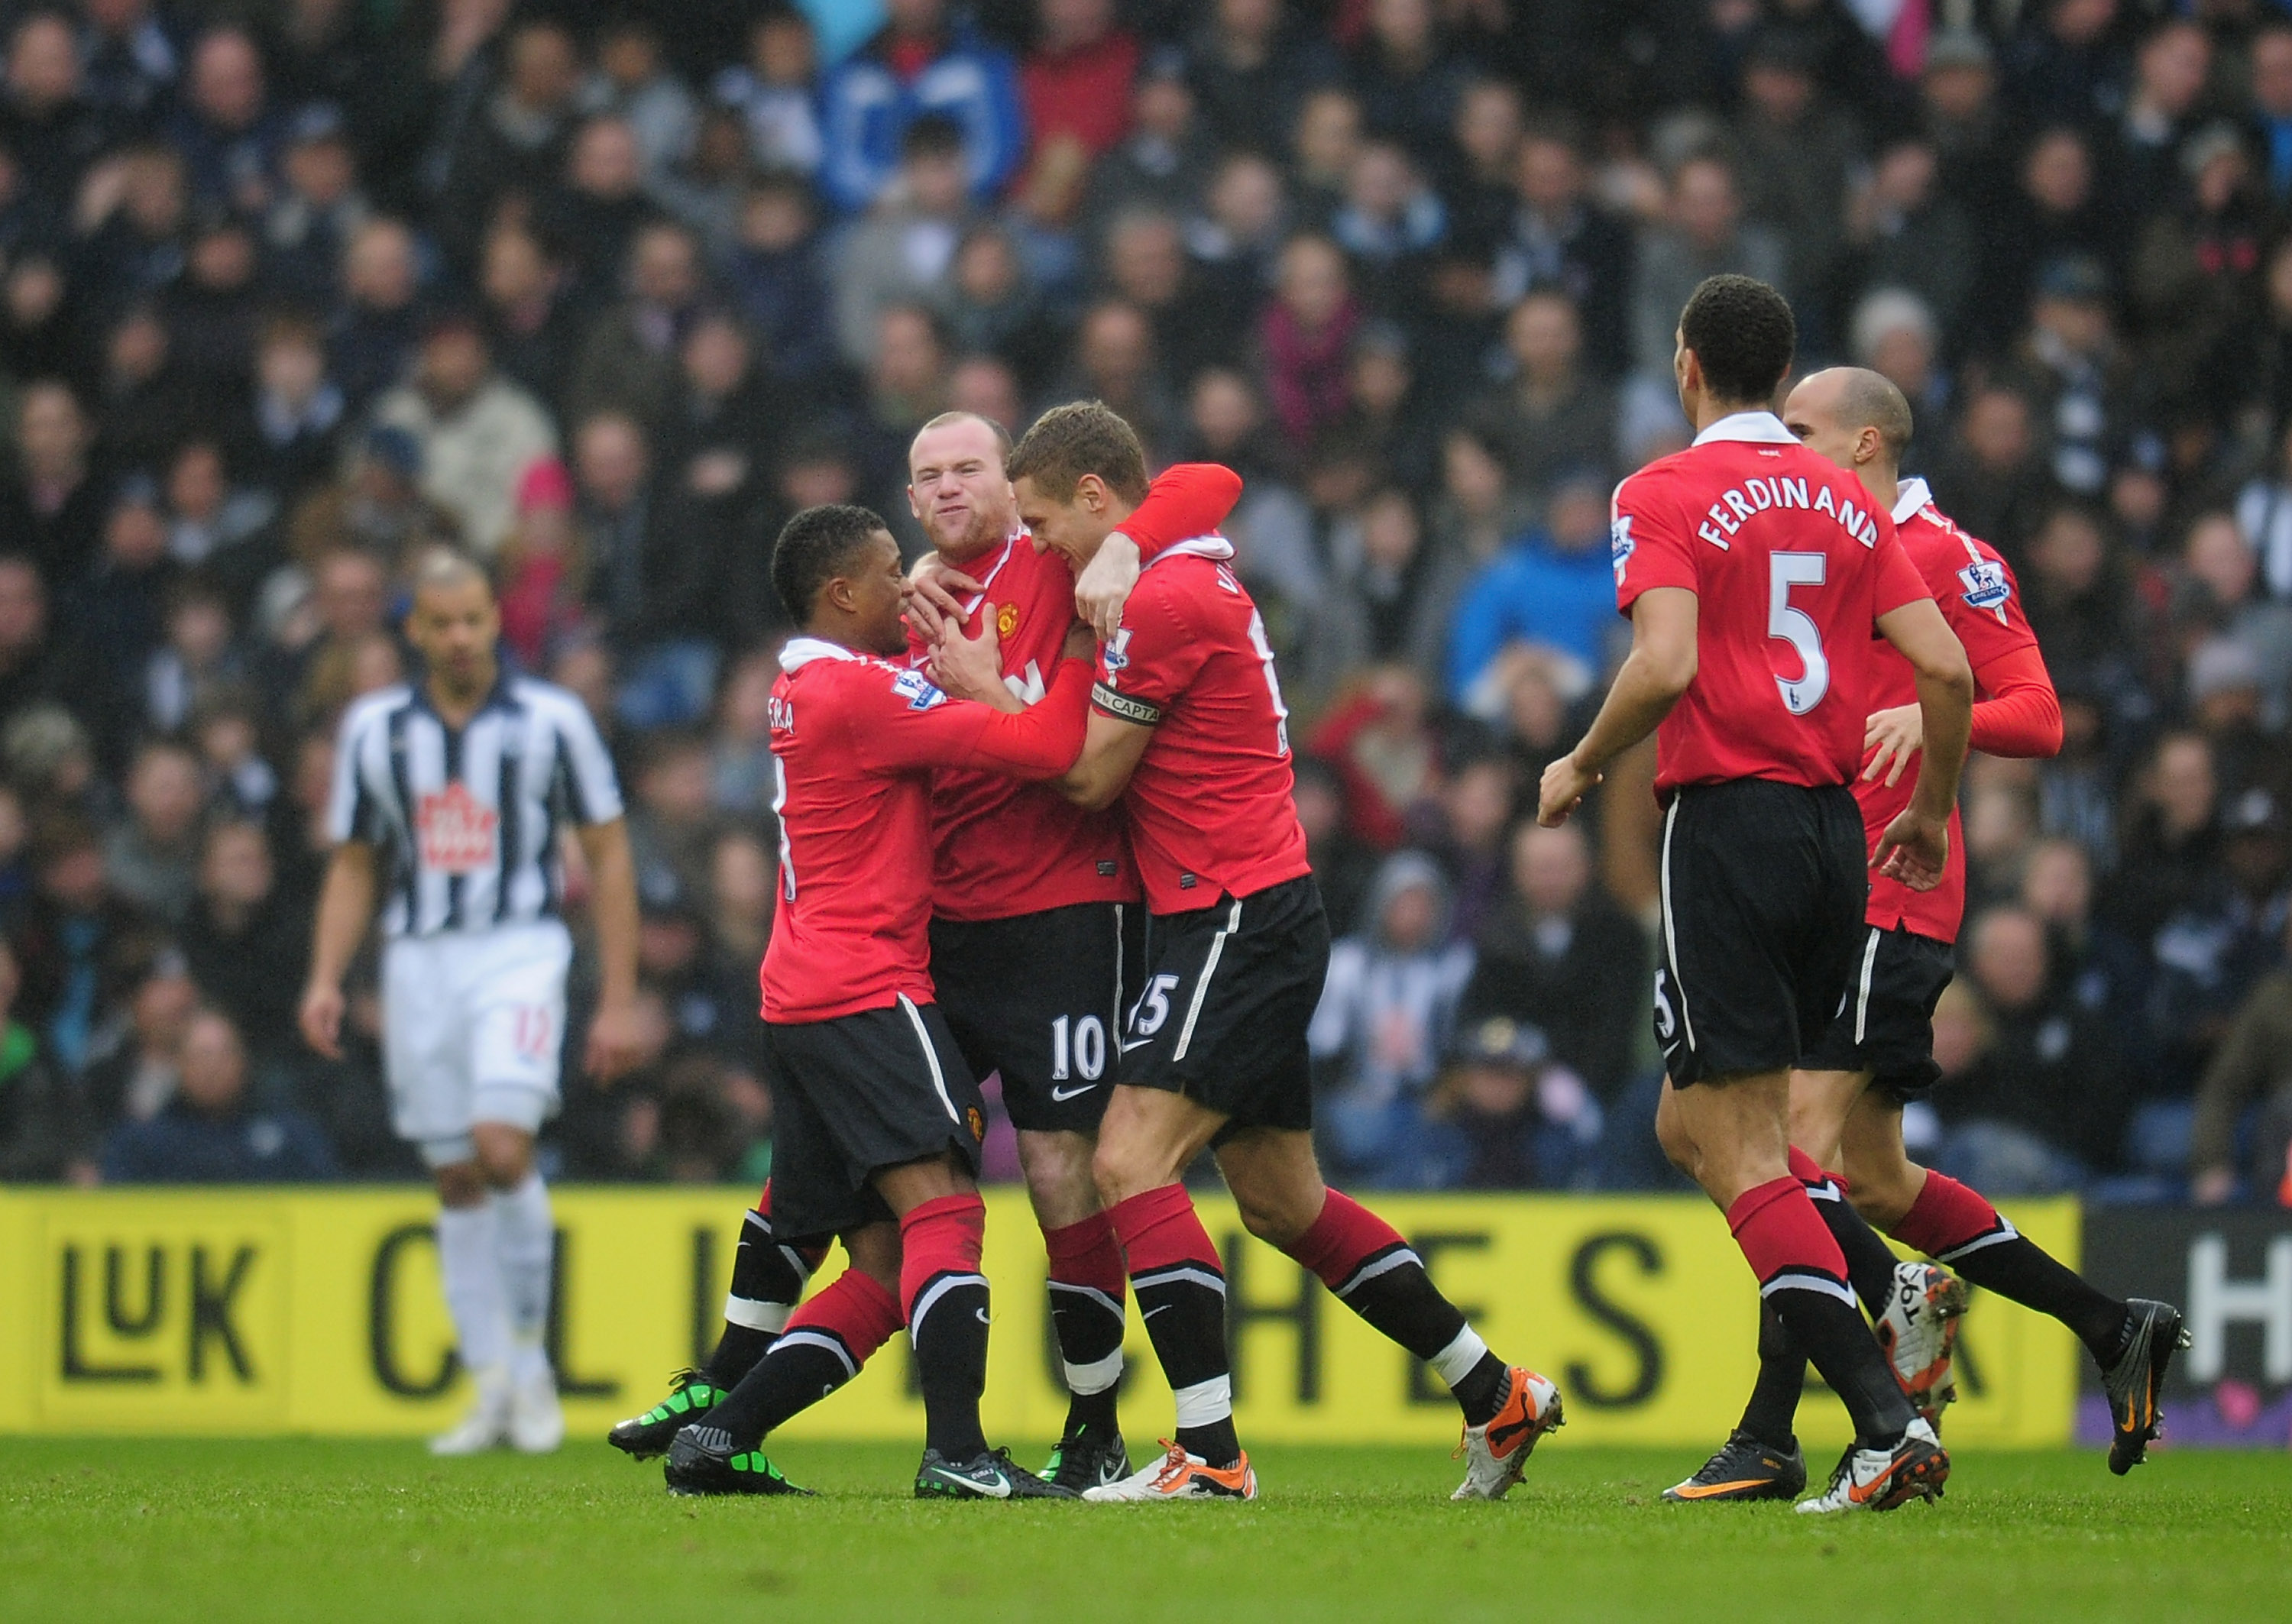 WEST BROMWICH, ENGLAND - JANUARY 01:  Wayne Rooney of Manchester United celebrates with team-mates after scoring during the Barclays Premier League match between West Bromich Albion and Manchester United at The Hawthorns on January 1, 2011 in West Bromwic